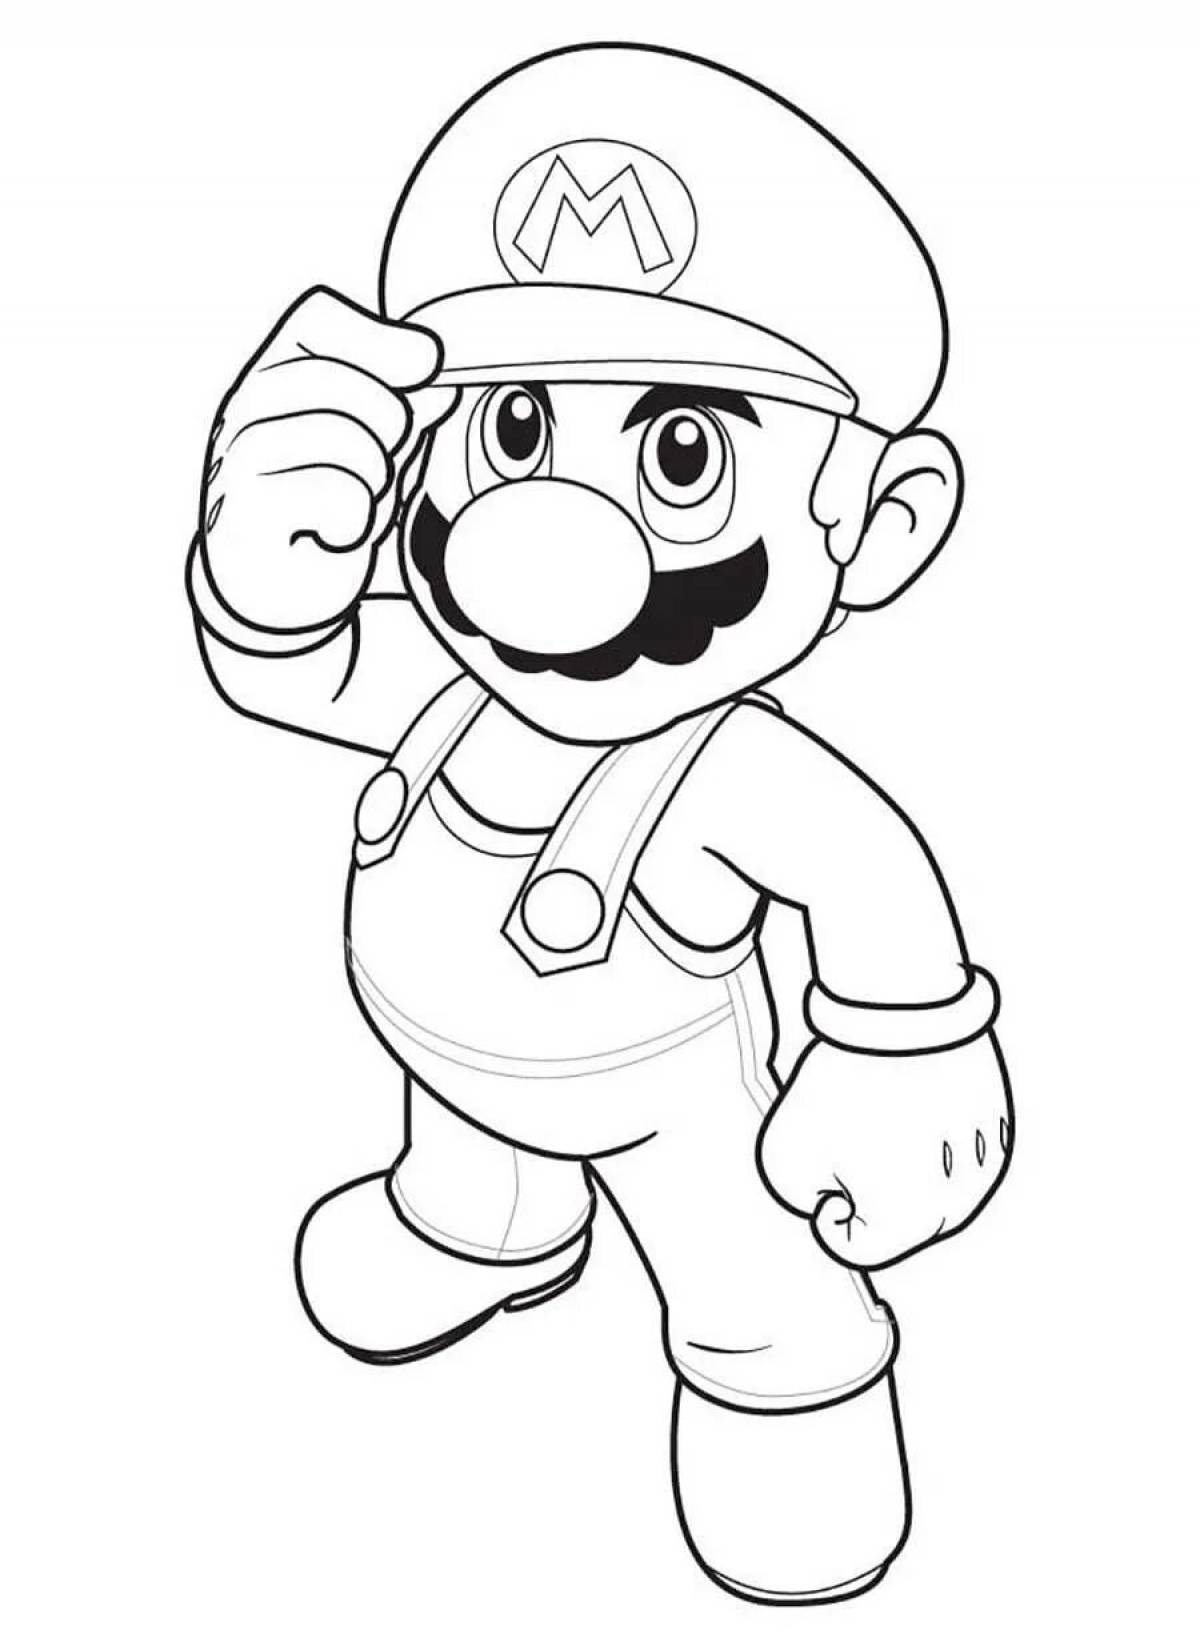 Mario for kids #15